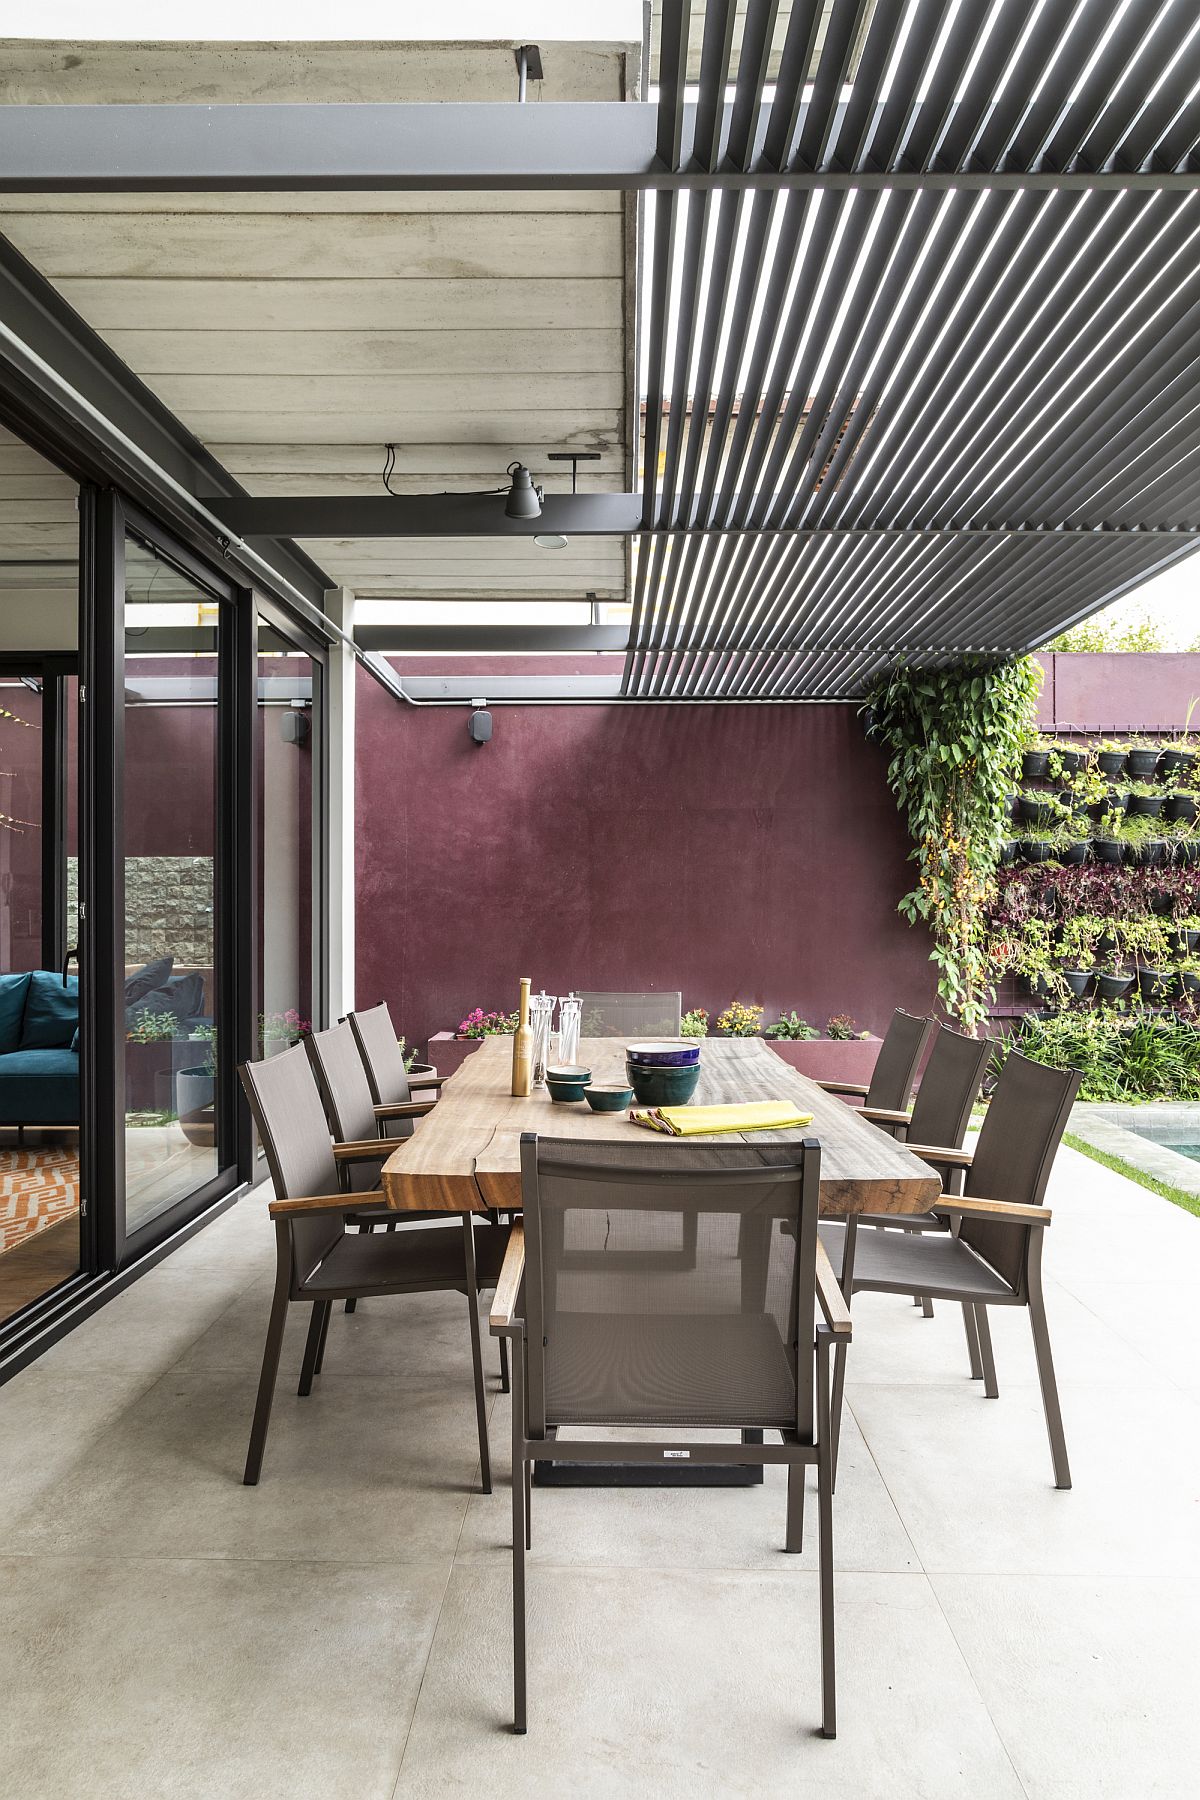 Outdoor-covered-dining-area-of-the-Brazilian-home-is-connected-with-the-living-area-31113